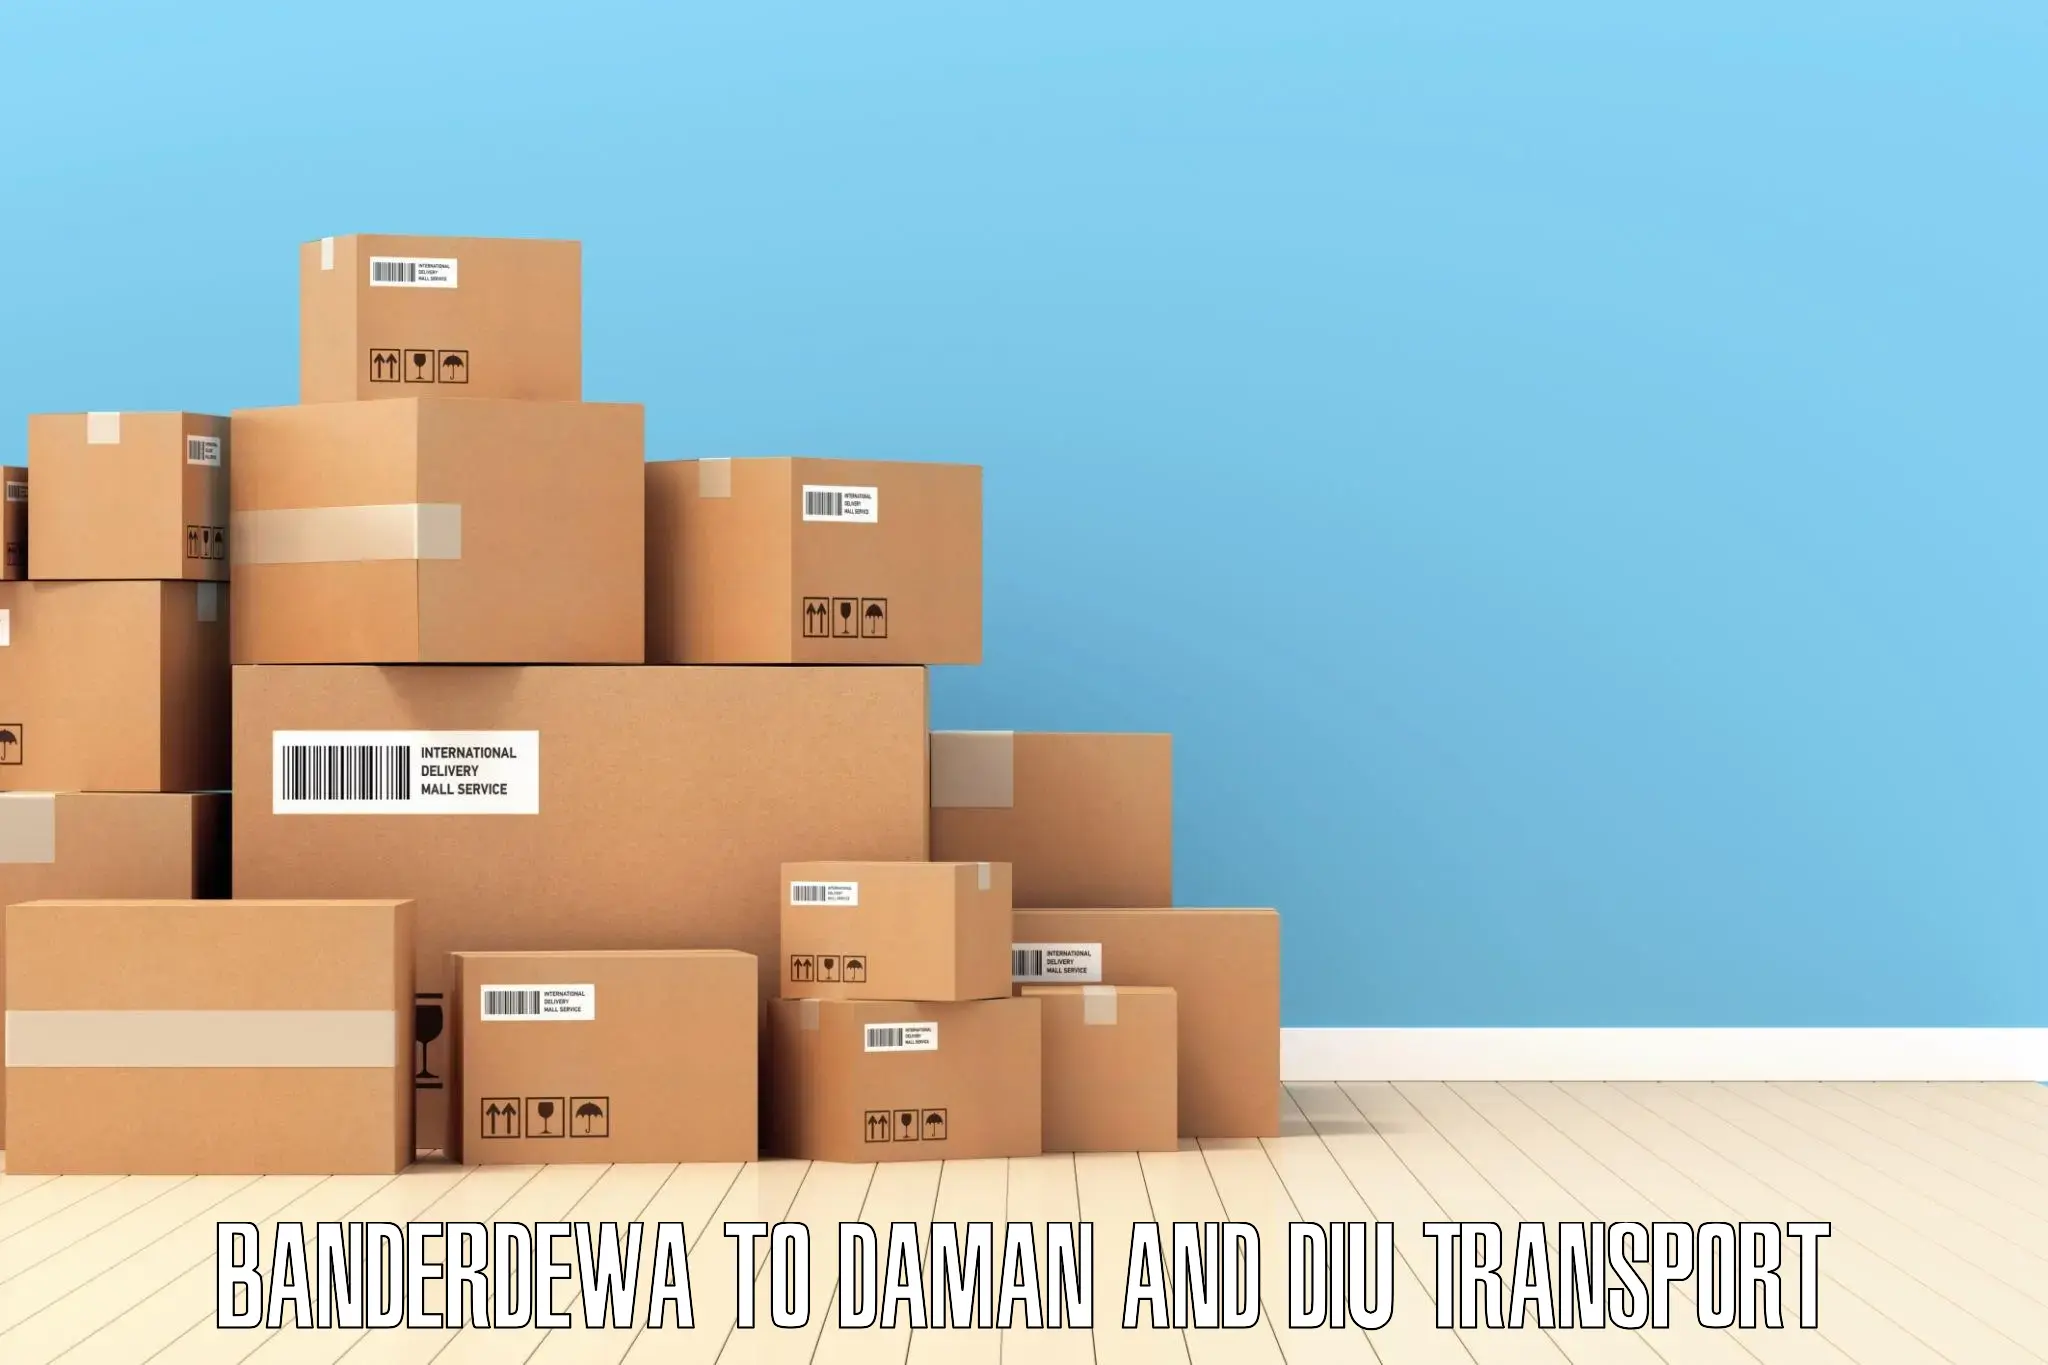 Container transport service Banderdewa to Daman and Diu